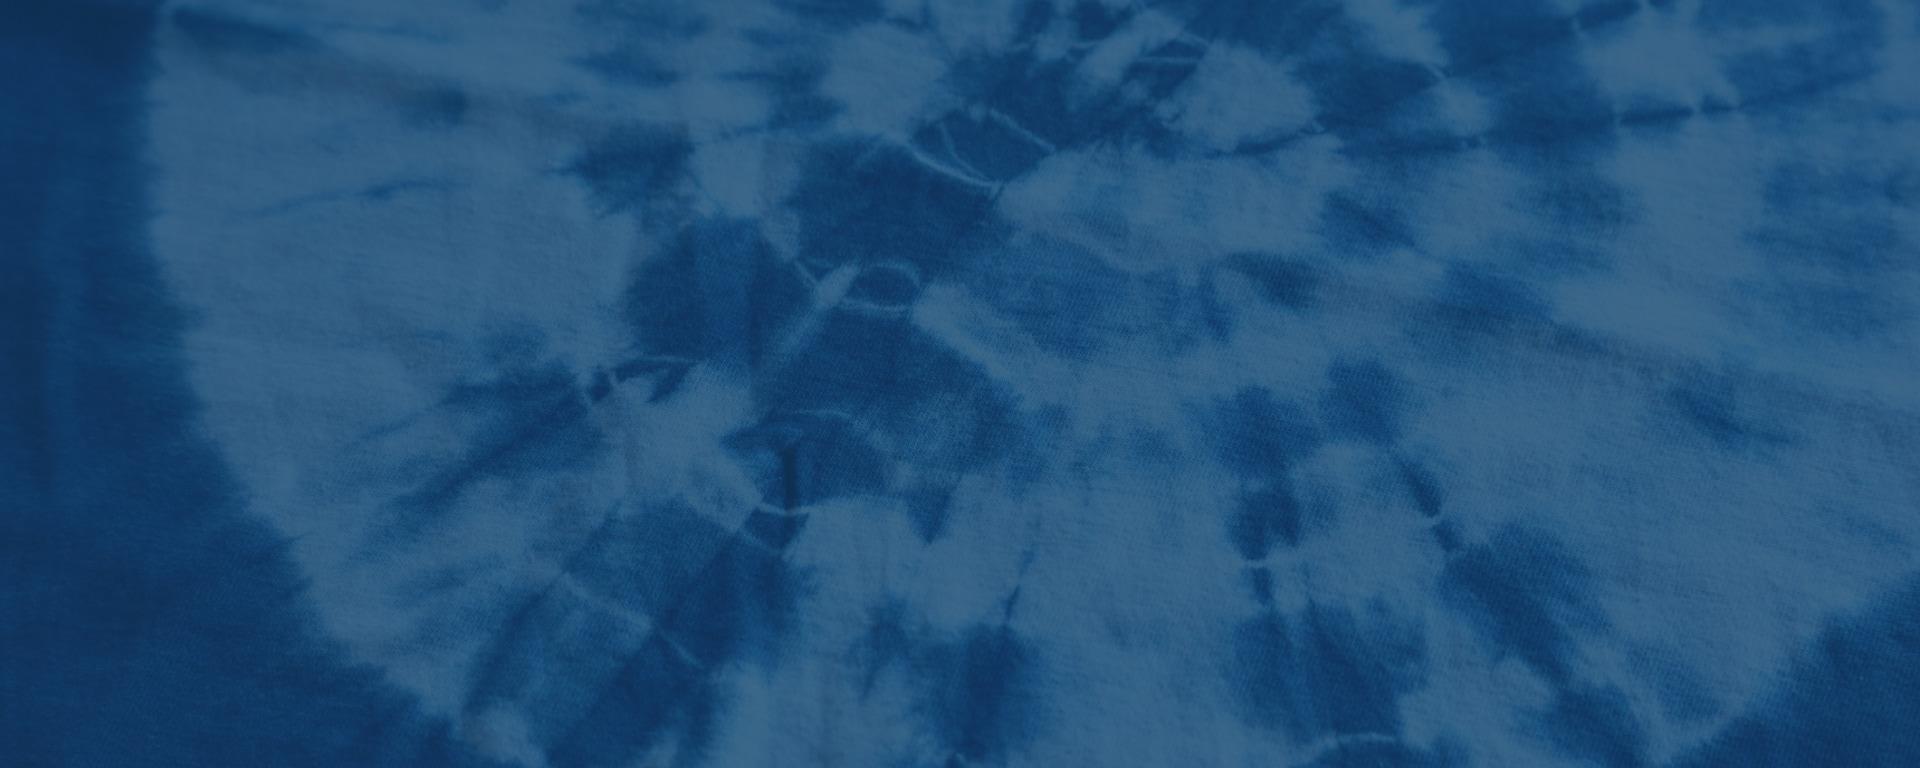 Photograph of dyed goods with an indigo image.